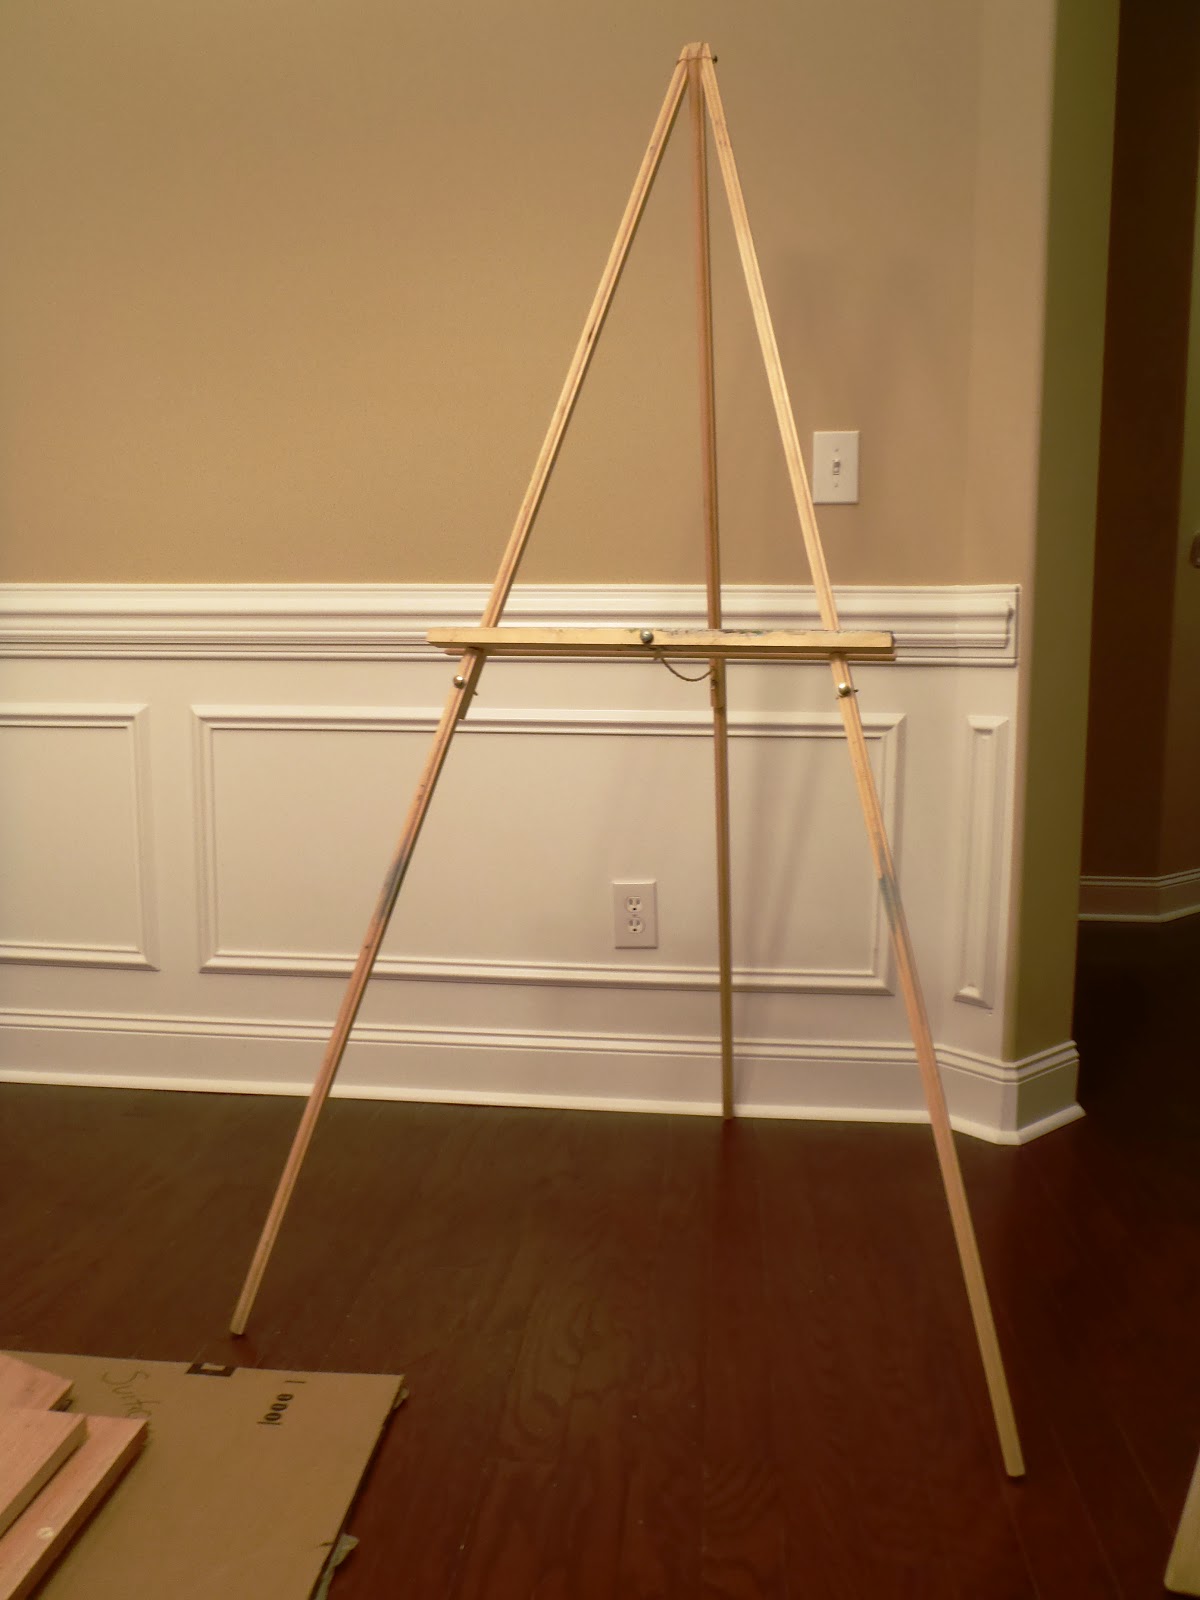 Lazy Liz on Less: Build a Cheap, Quick and Easy Artist Easel